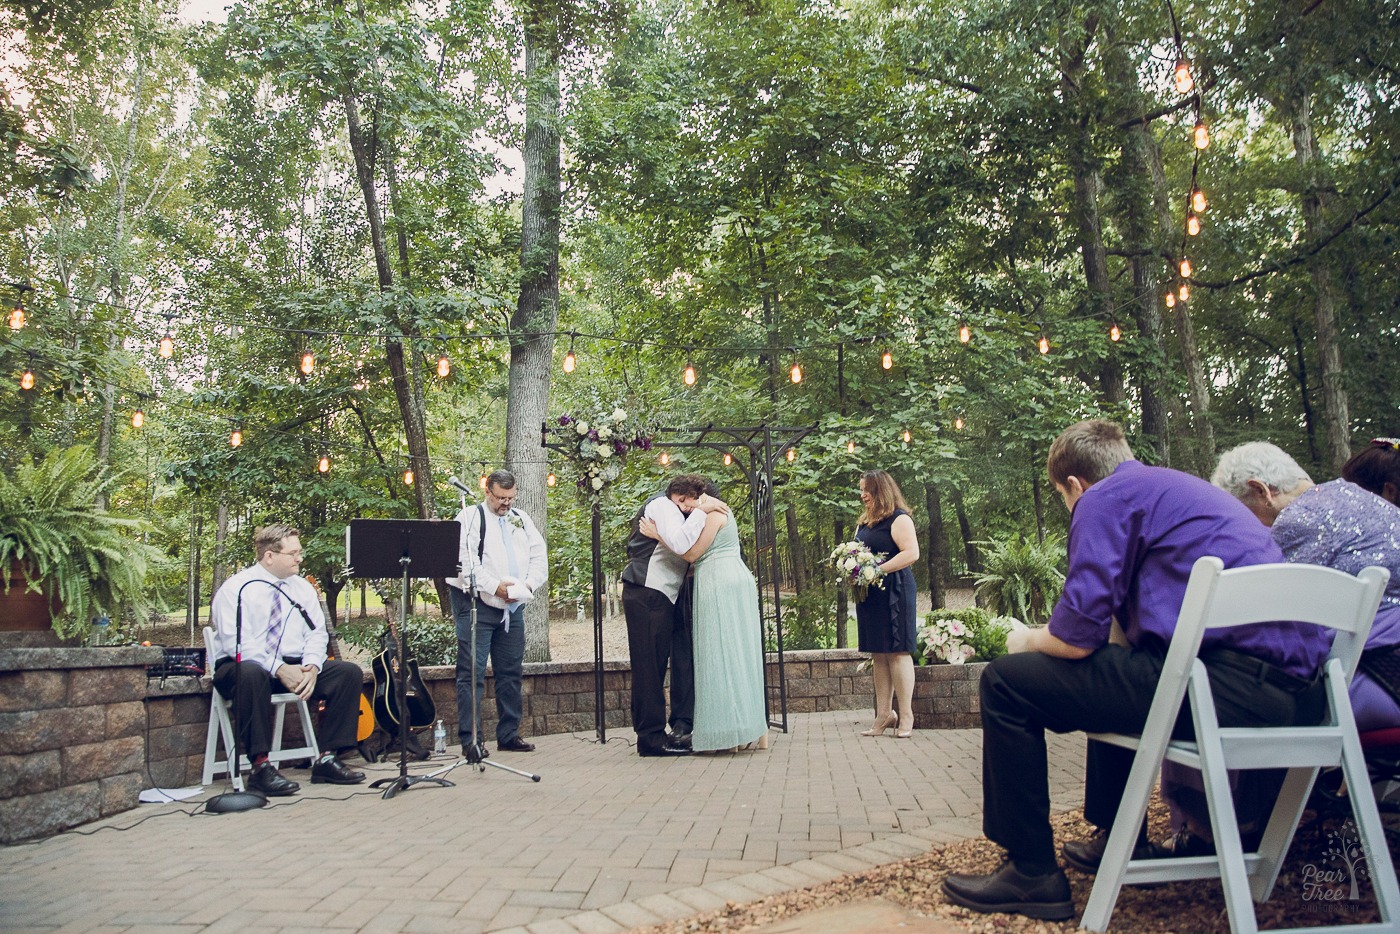 Bride and groom hugging while officiant prays and everyone bows their heads